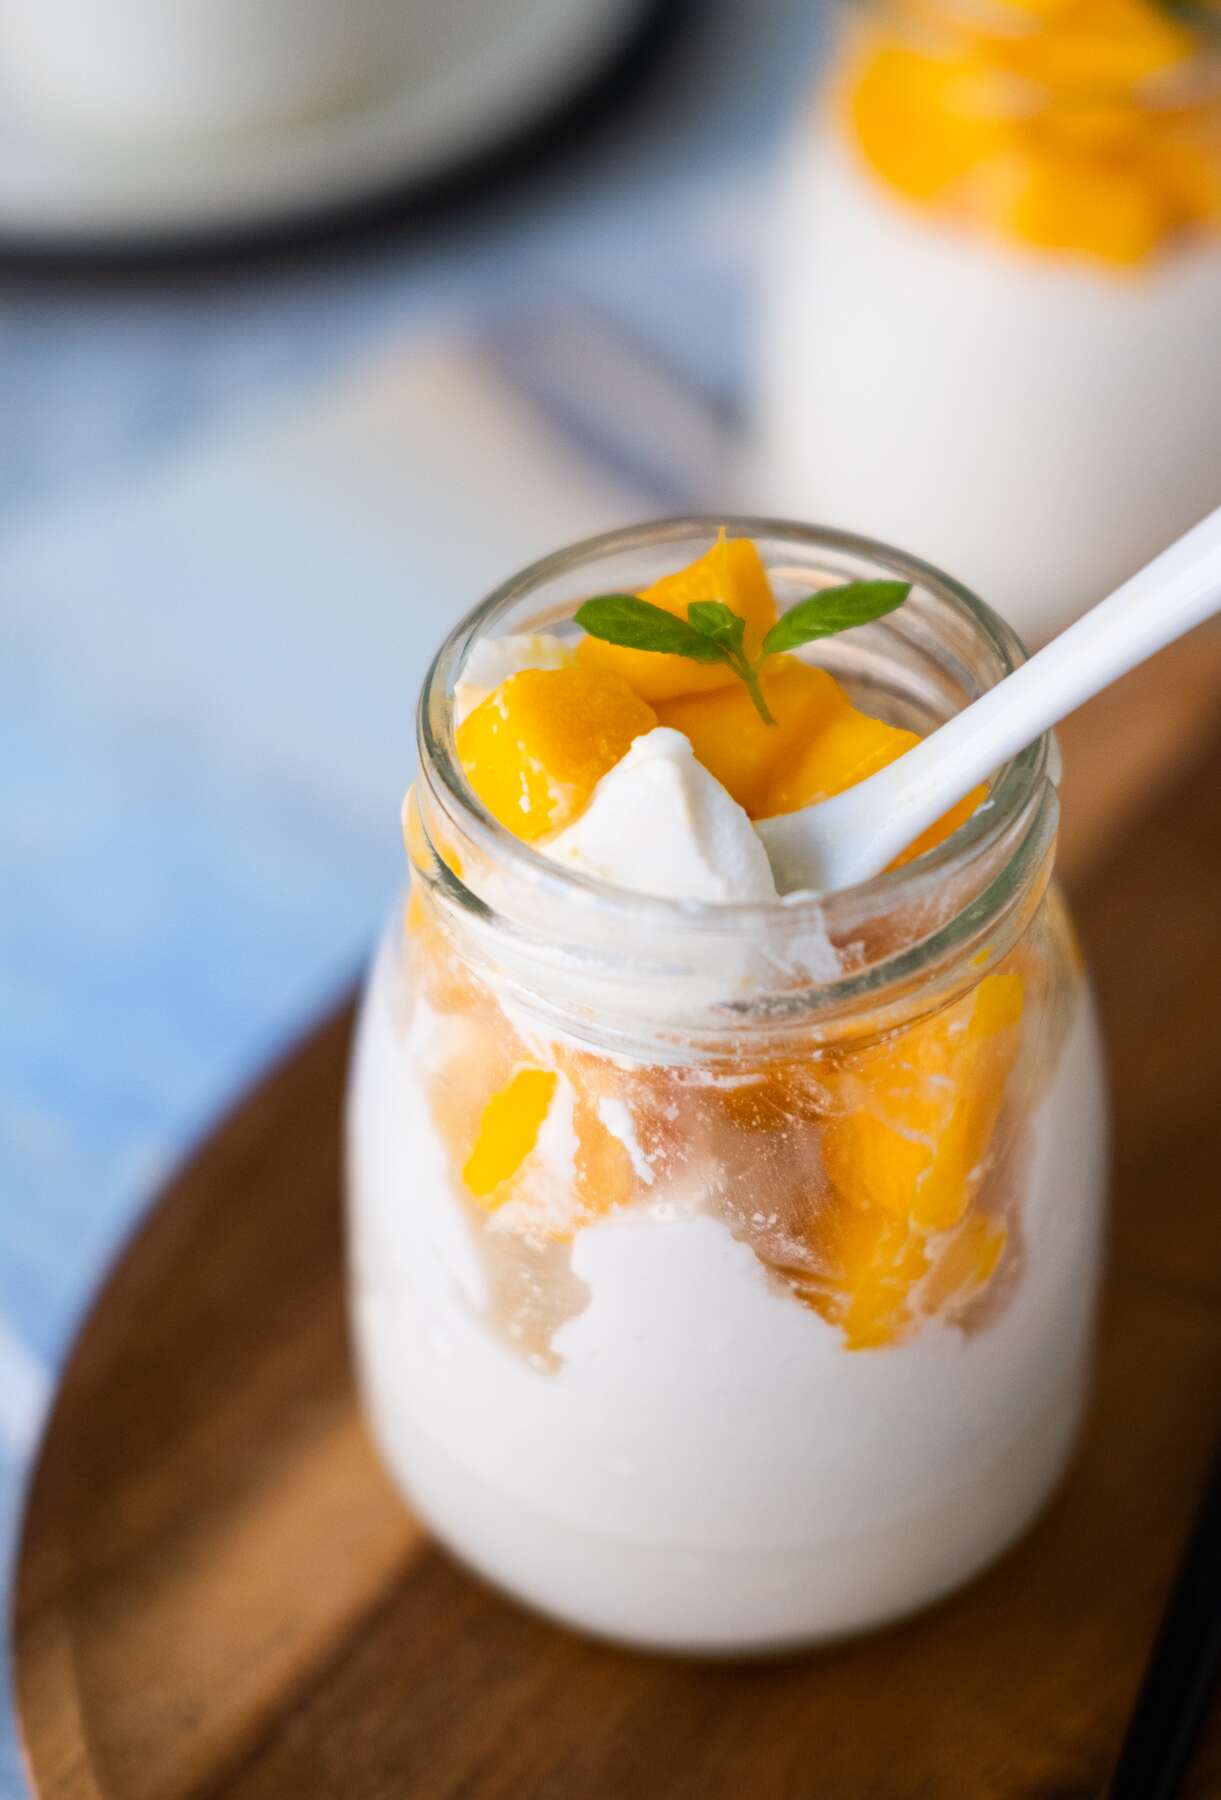 Scoop the mango coconut pudding with a spoon.